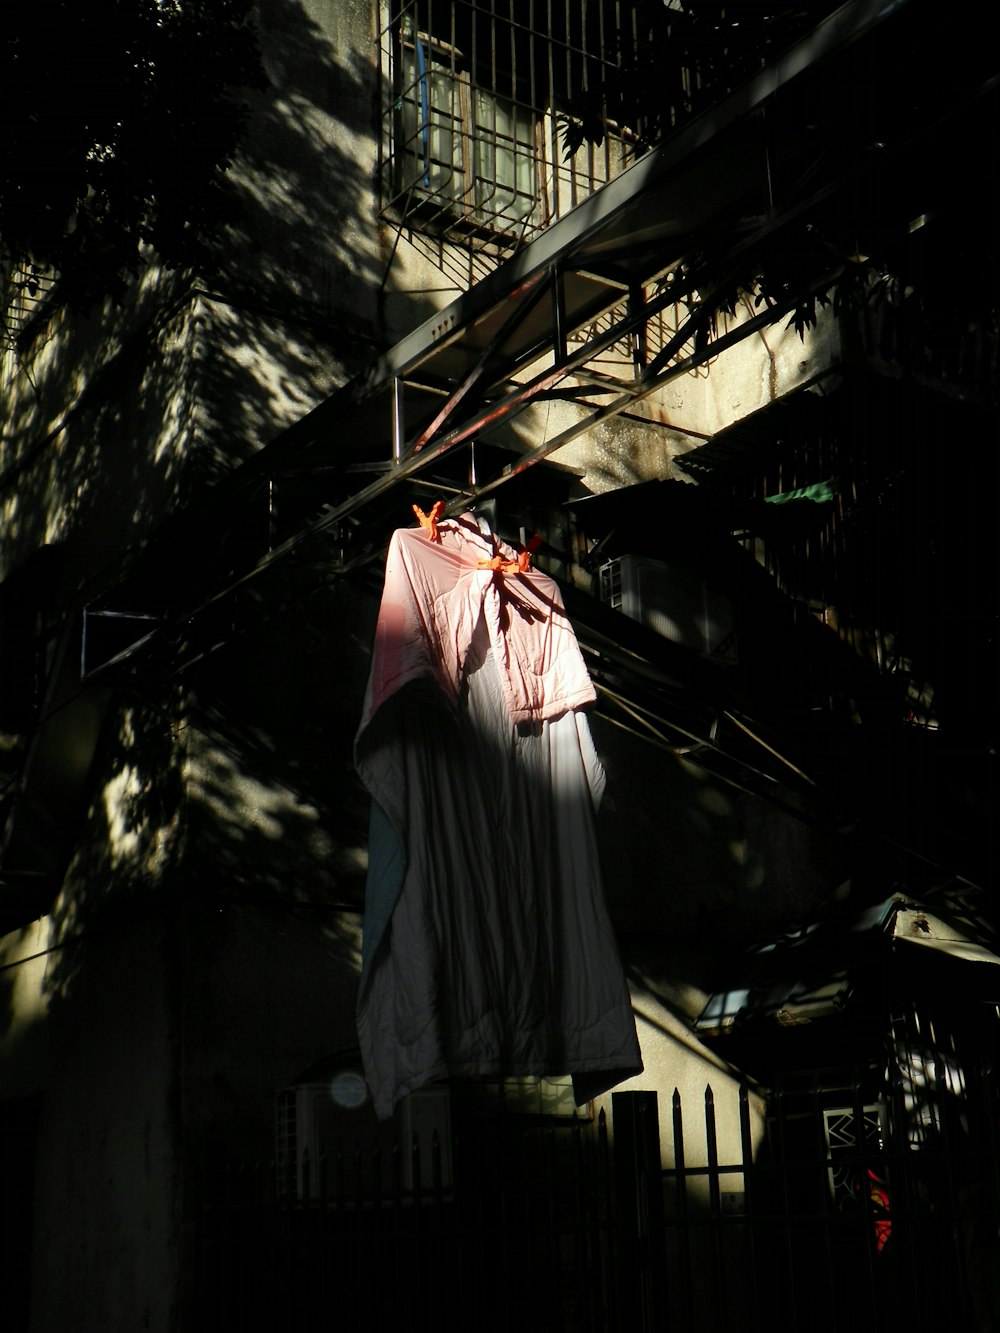 clothes hanging on a clothes line outside a building